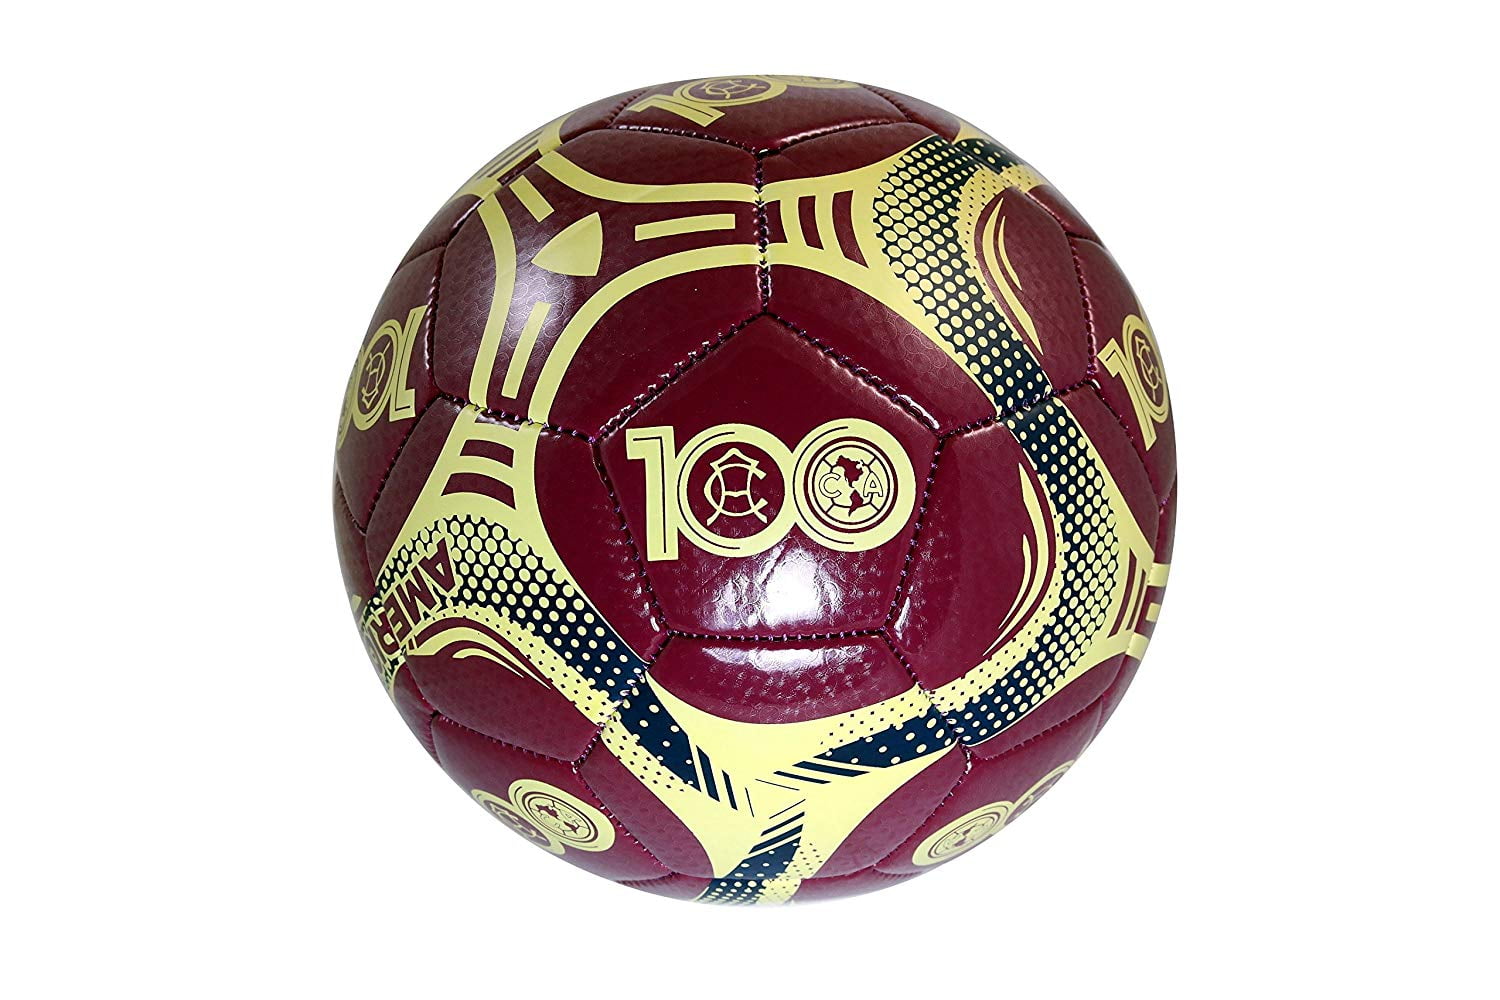 FC Barcelona Authentic Official Licensed Soccer Ball Size 5-04-6 